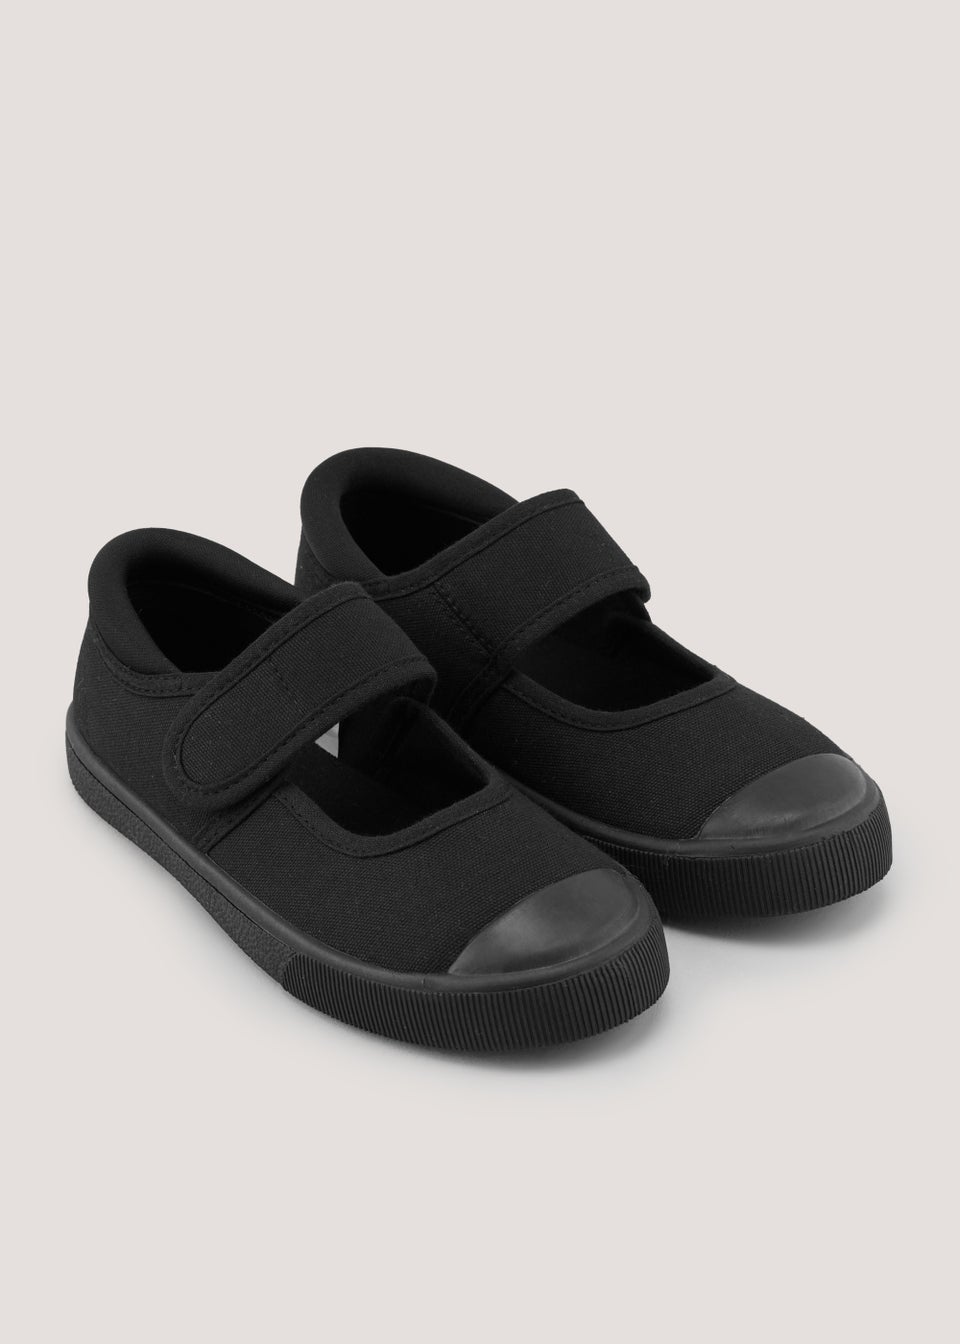 Kids Black Mary Jane Plimsoll Shoes (Younger 7-Older 3)